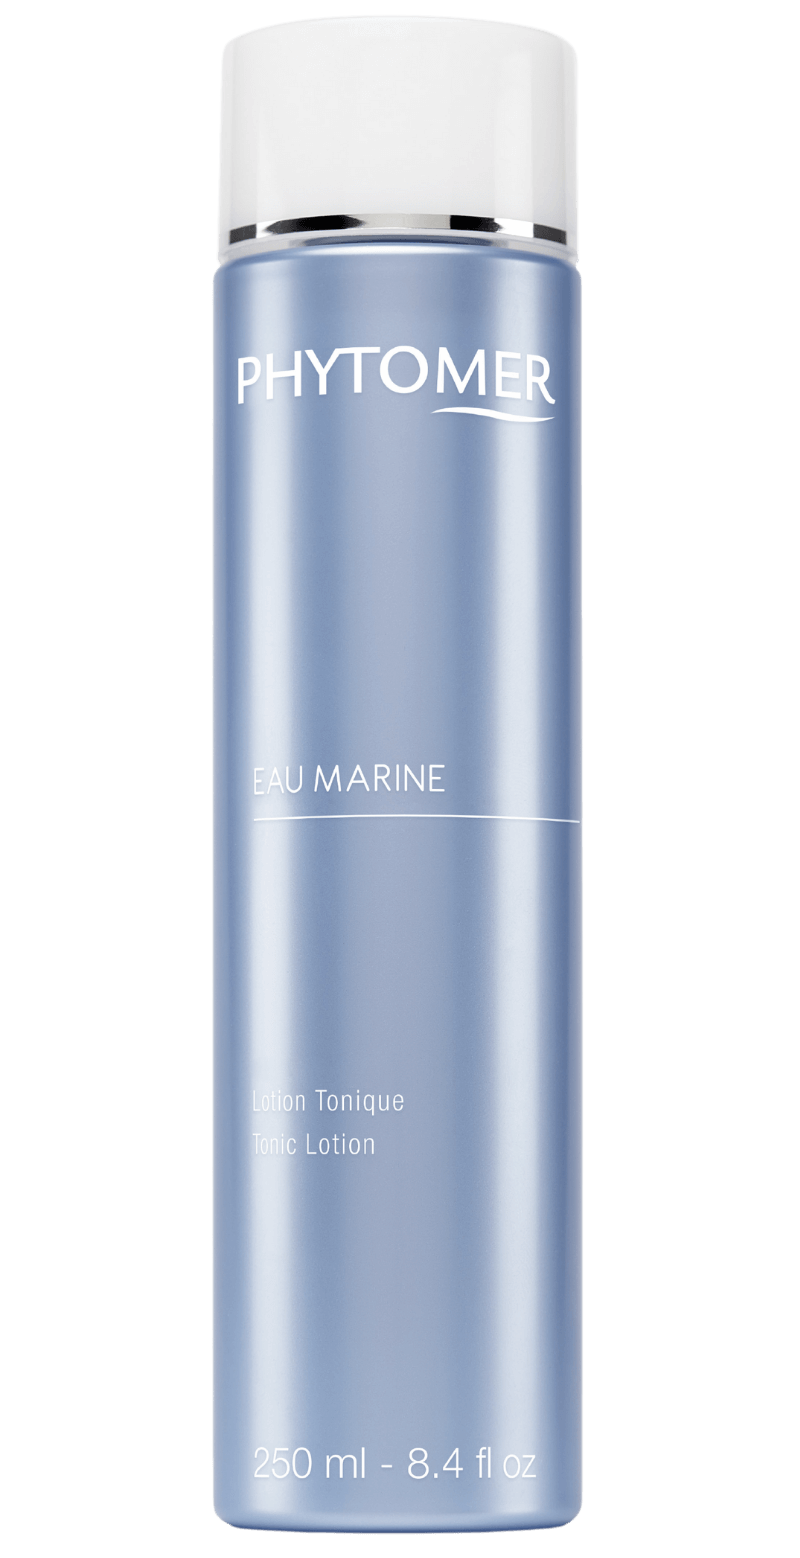 &#39;s Phytomer EAU MARINE Alcohol-Free Tonic Lotion - Bellini&#39;s Skin and Parfumerie 